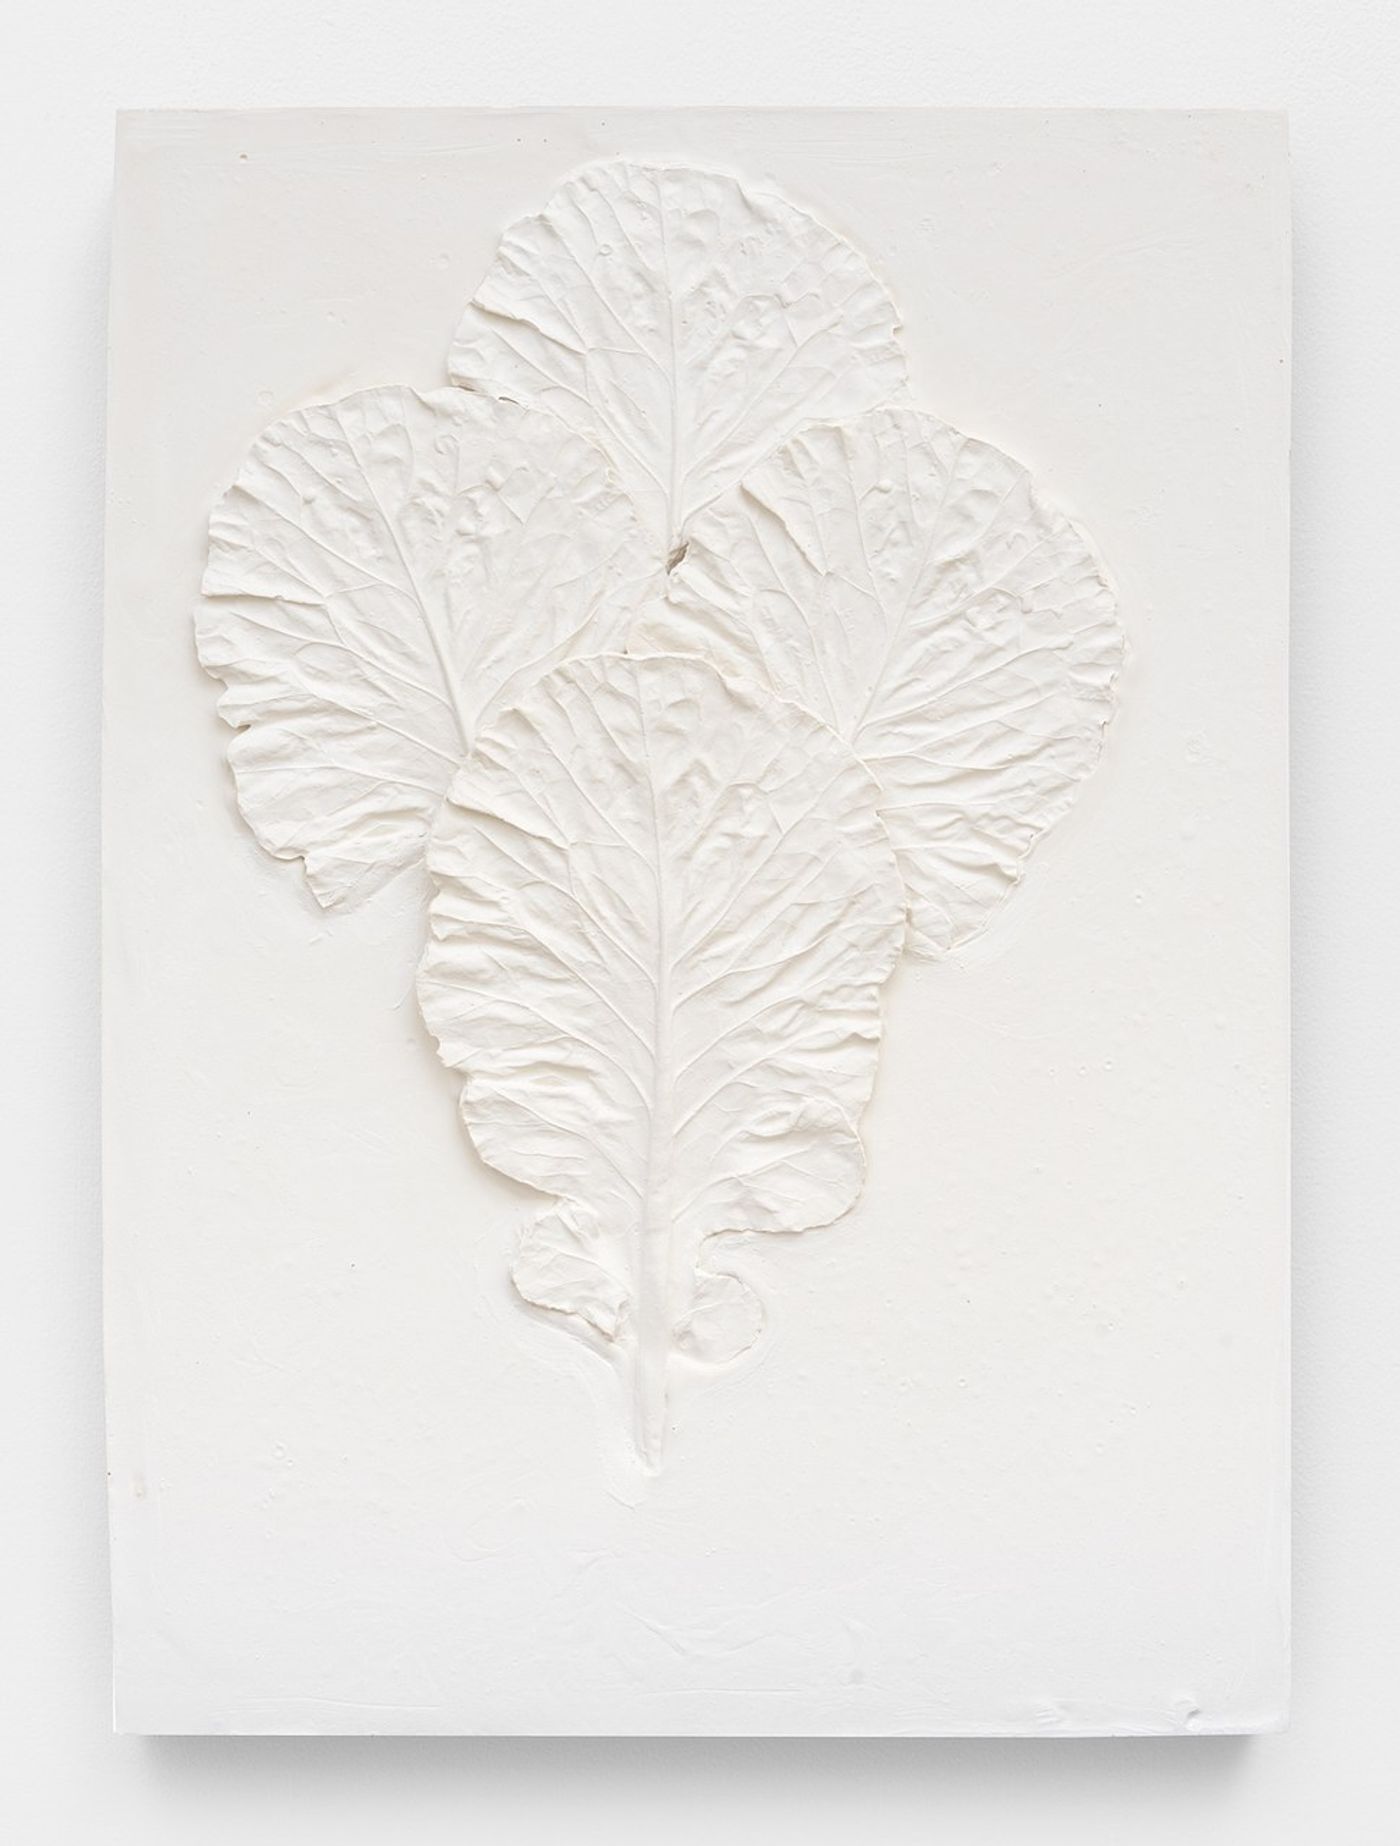 Image of Medium Collard Greens Composition with Four Leaves, 2022: Plaster